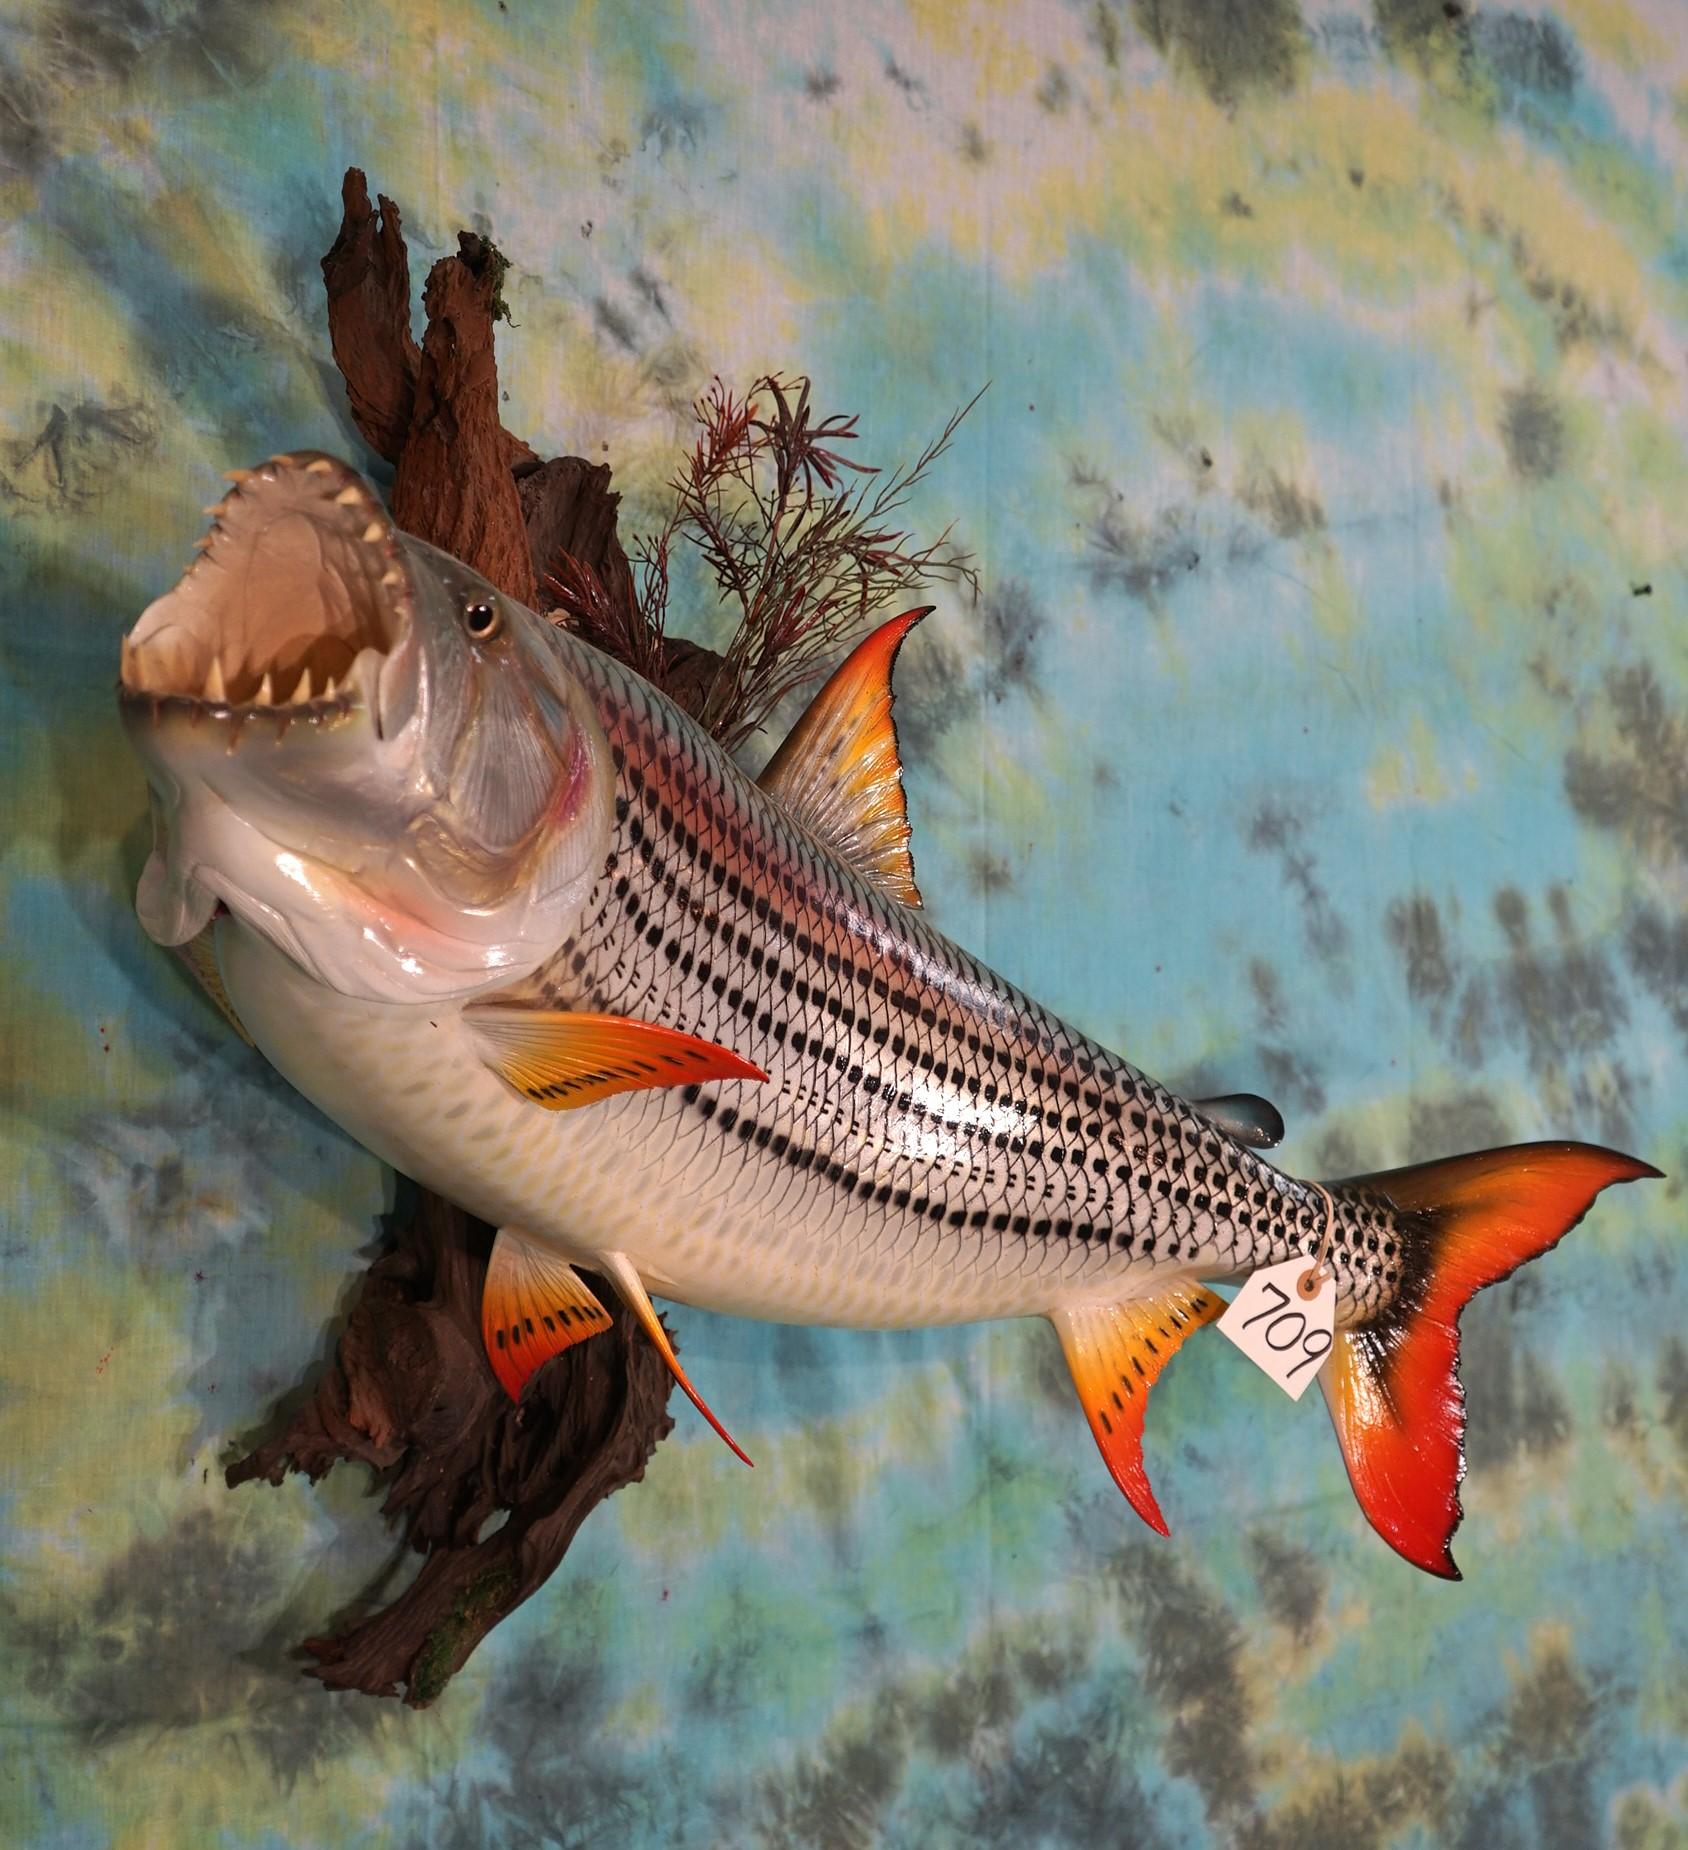 Beautiful Brand New! 32" African Tiger Fish High Quality Fiberglass Reproduction Taxidermy Mount